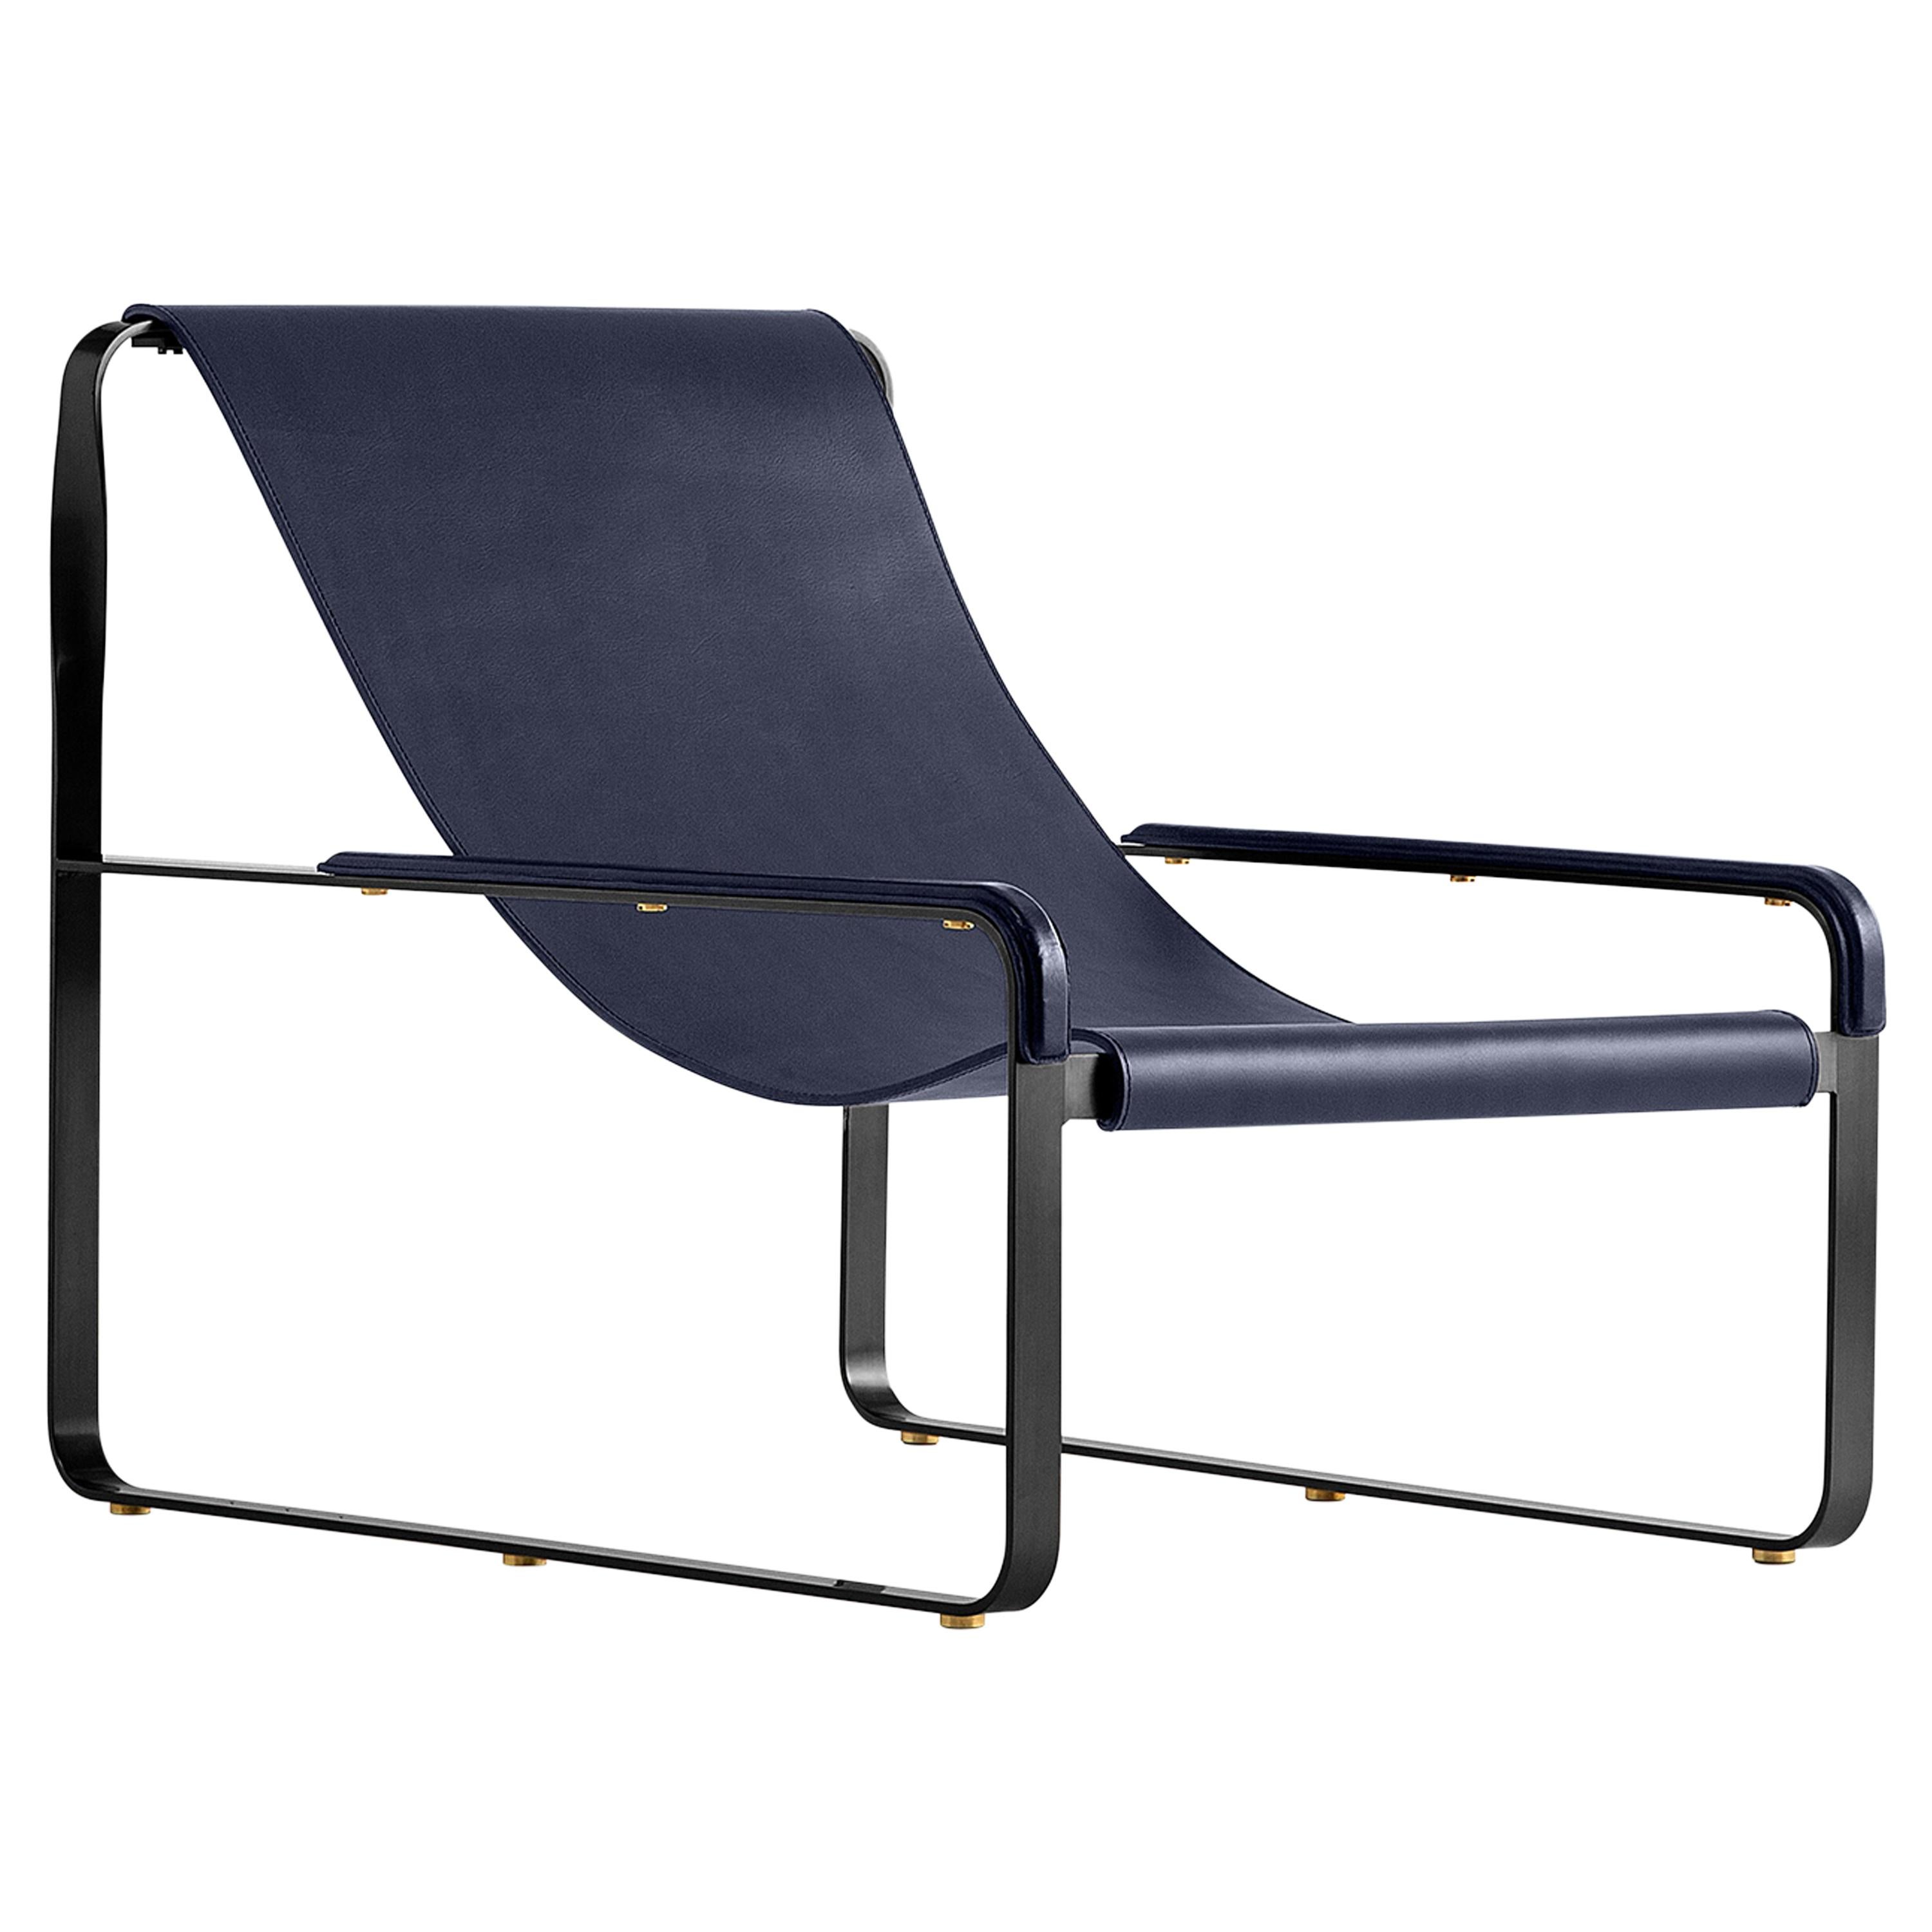 Contemporary Chaise Lounge, Black Steel and Blue Navy Saddle Leather